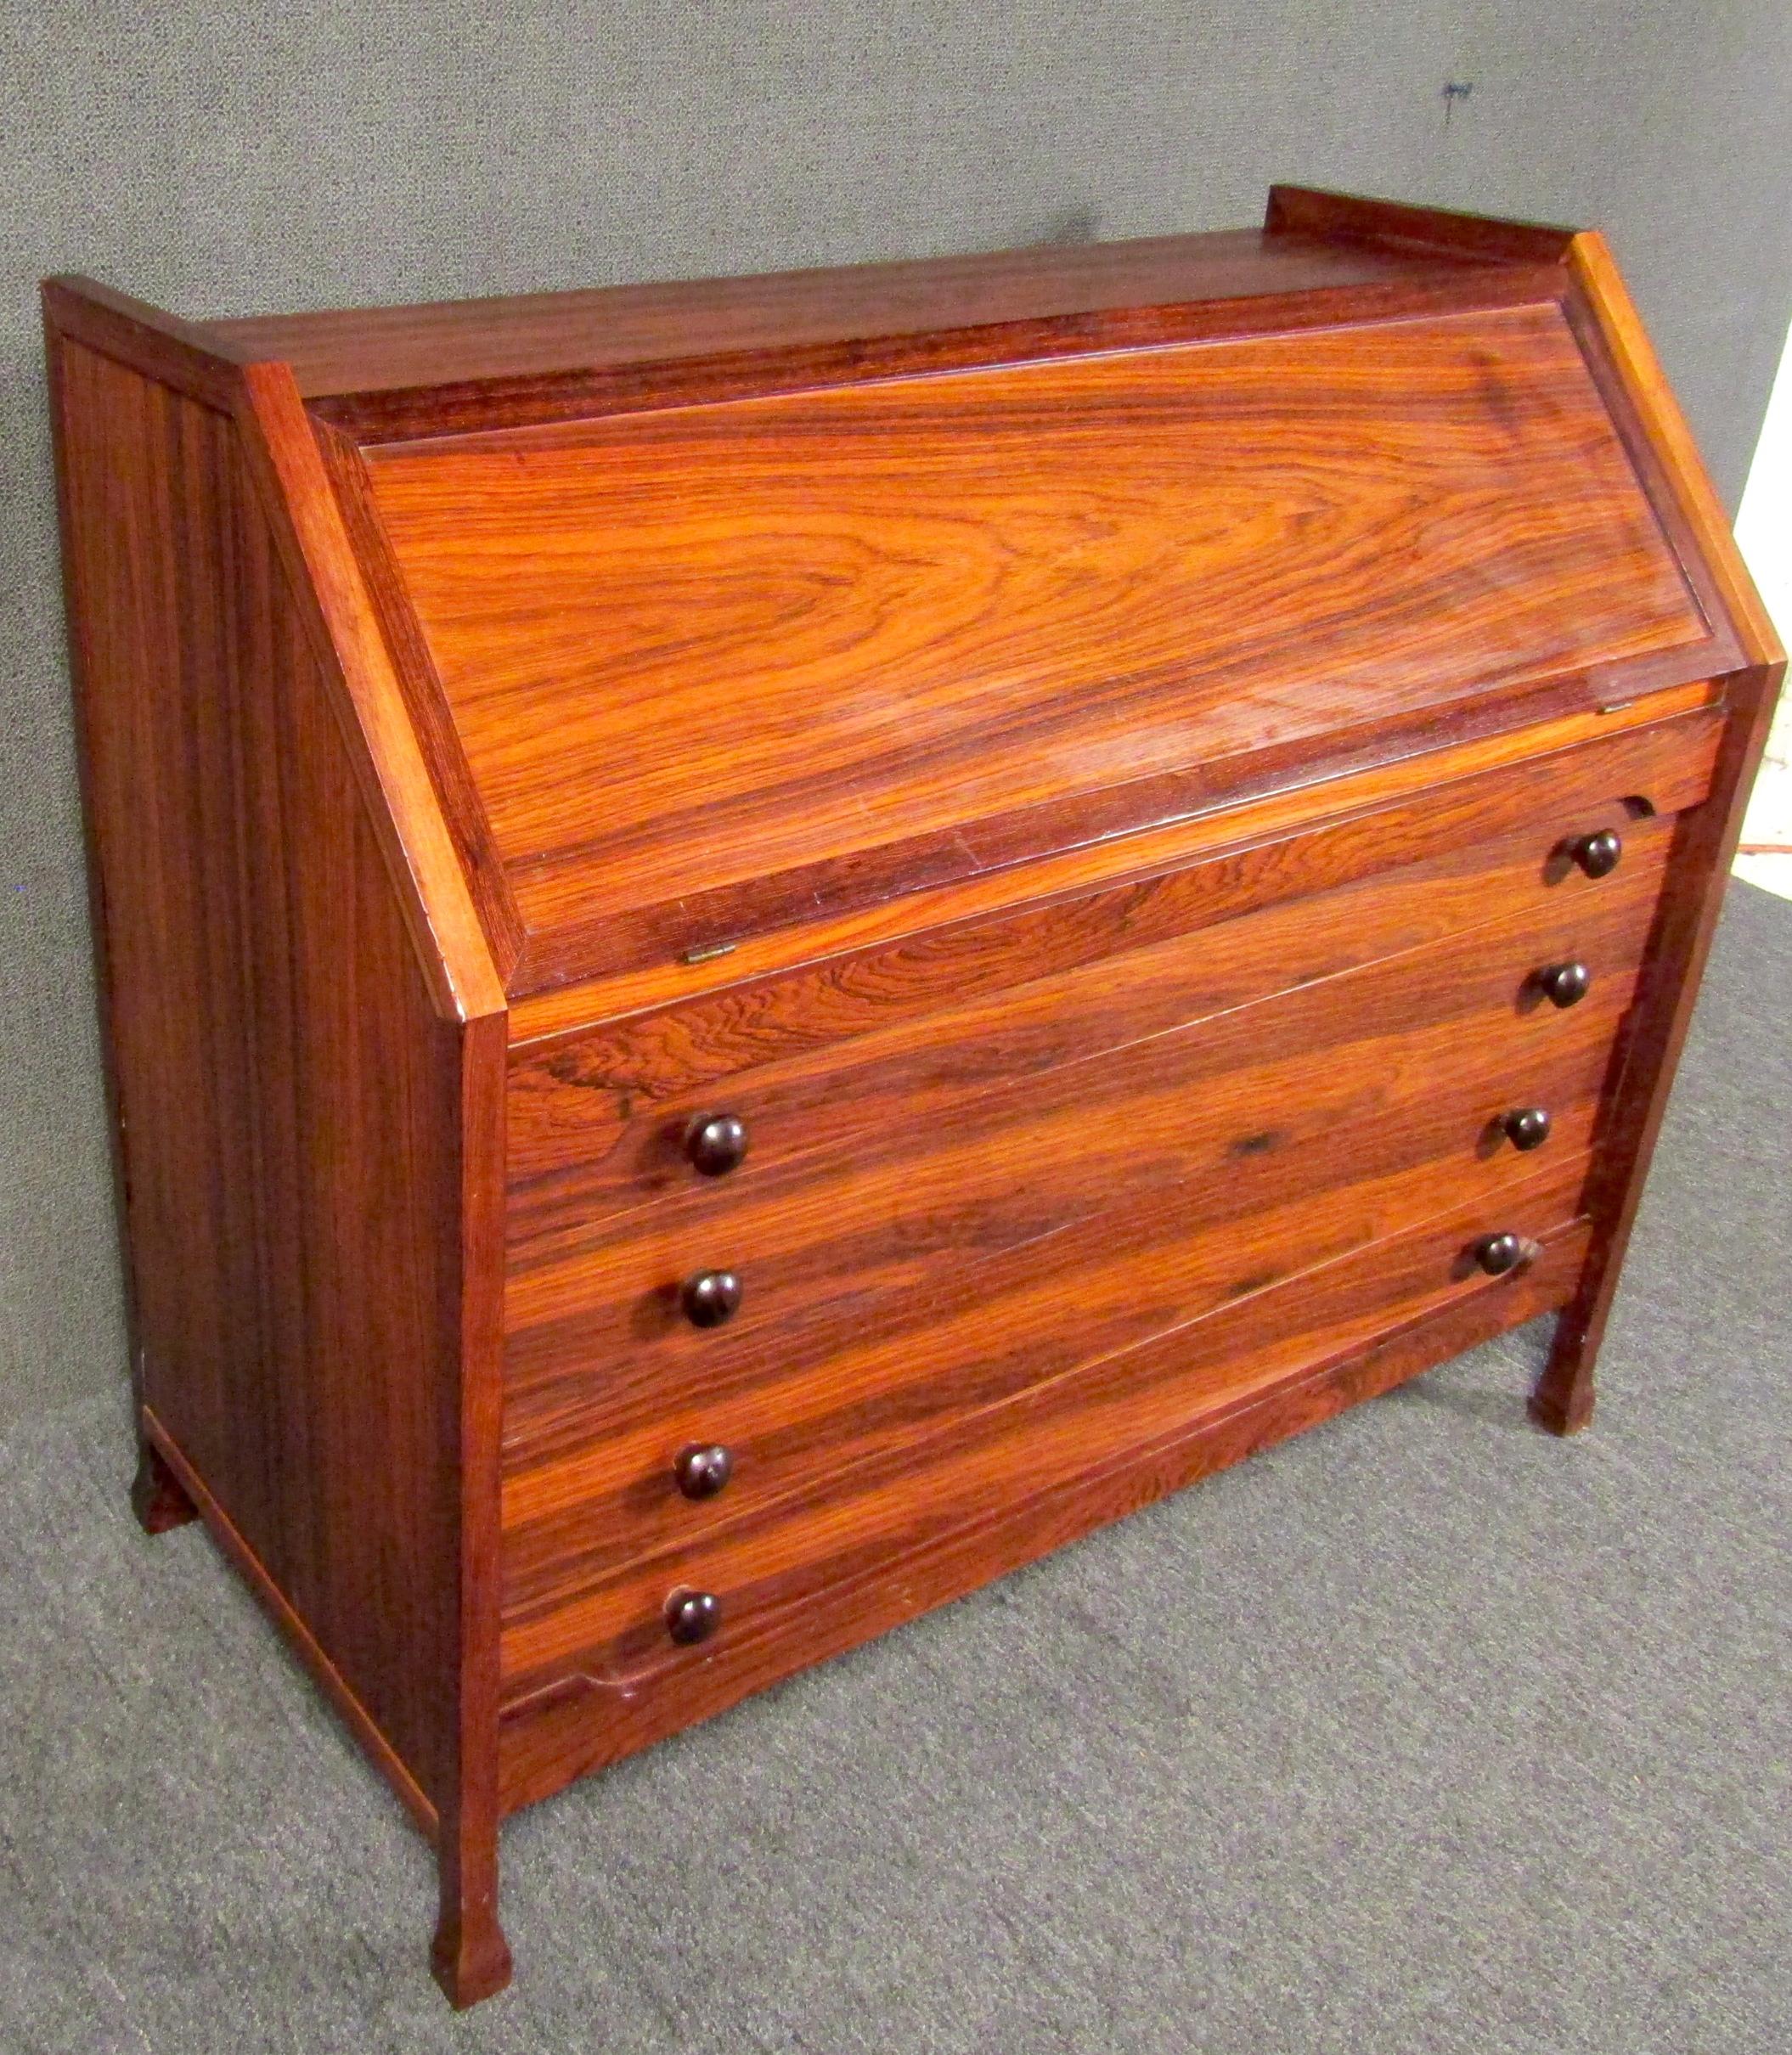 Mid-Century Modern dresser with sculpted trim and wood drawer pulls. This piece features a fold-down desk with brass hinges, storage compartments, and three small drawers. The dresser has four spacious drawers with dove-tail joints.

Please